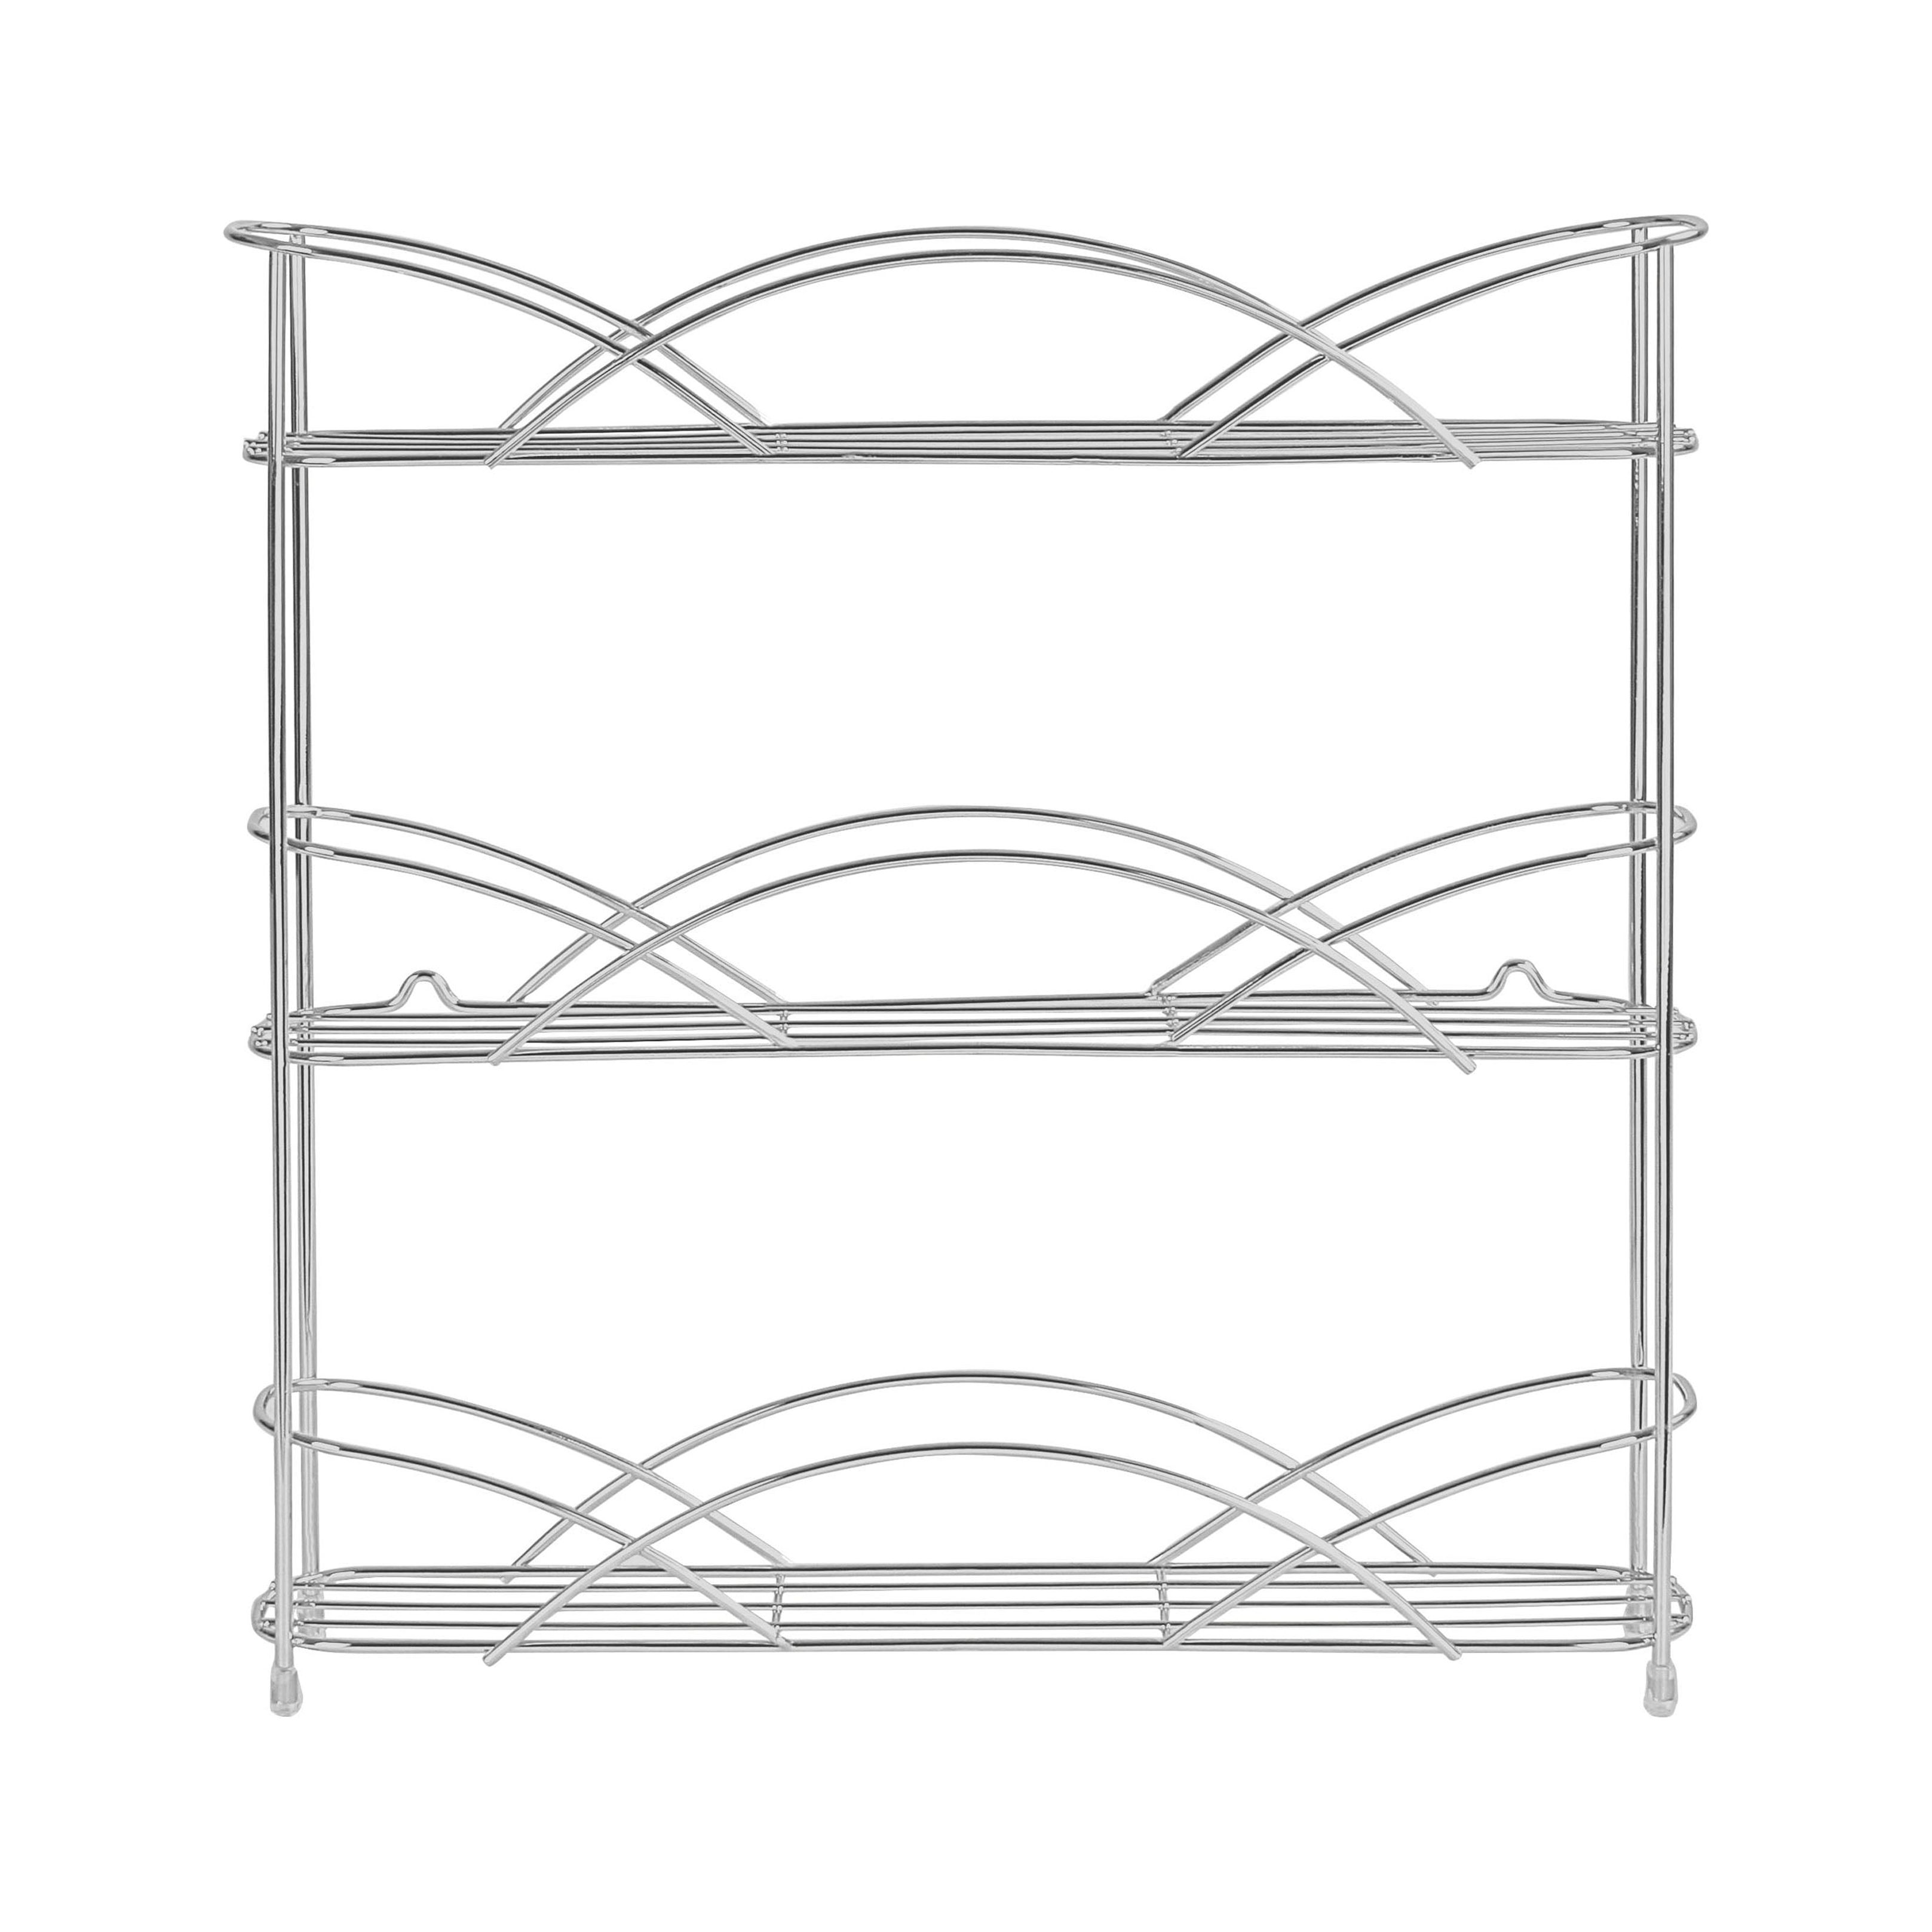 Spectrum Countertop and Wall Mount 3 Tier Spice Rack - image 1 of 7